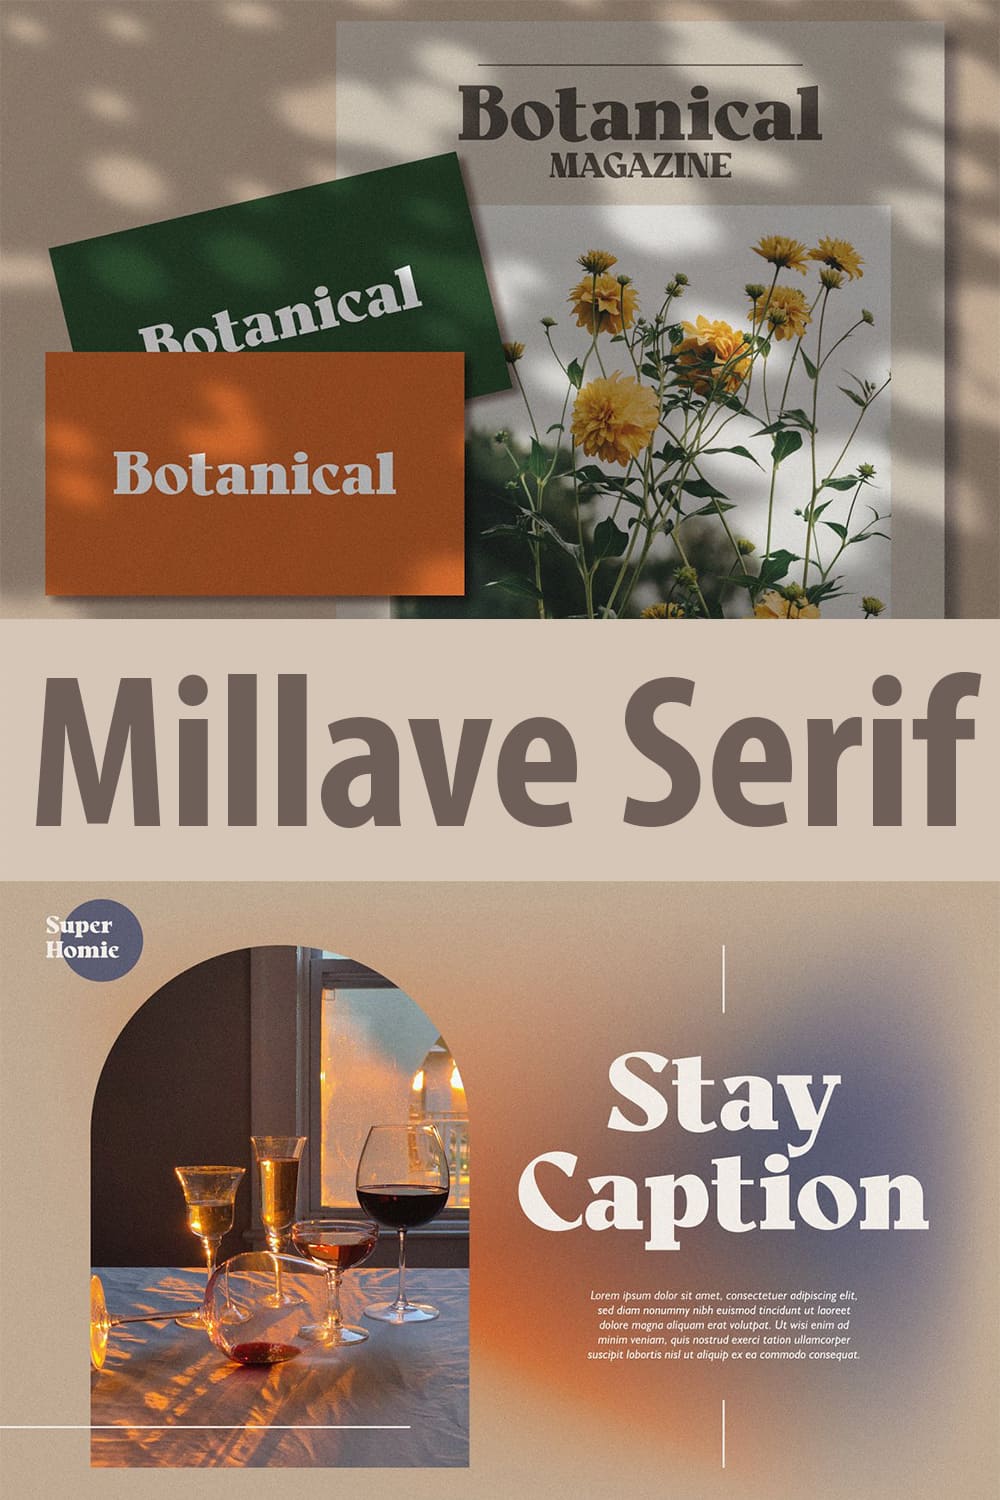 Millave Serif Preview - "Stay Caption".